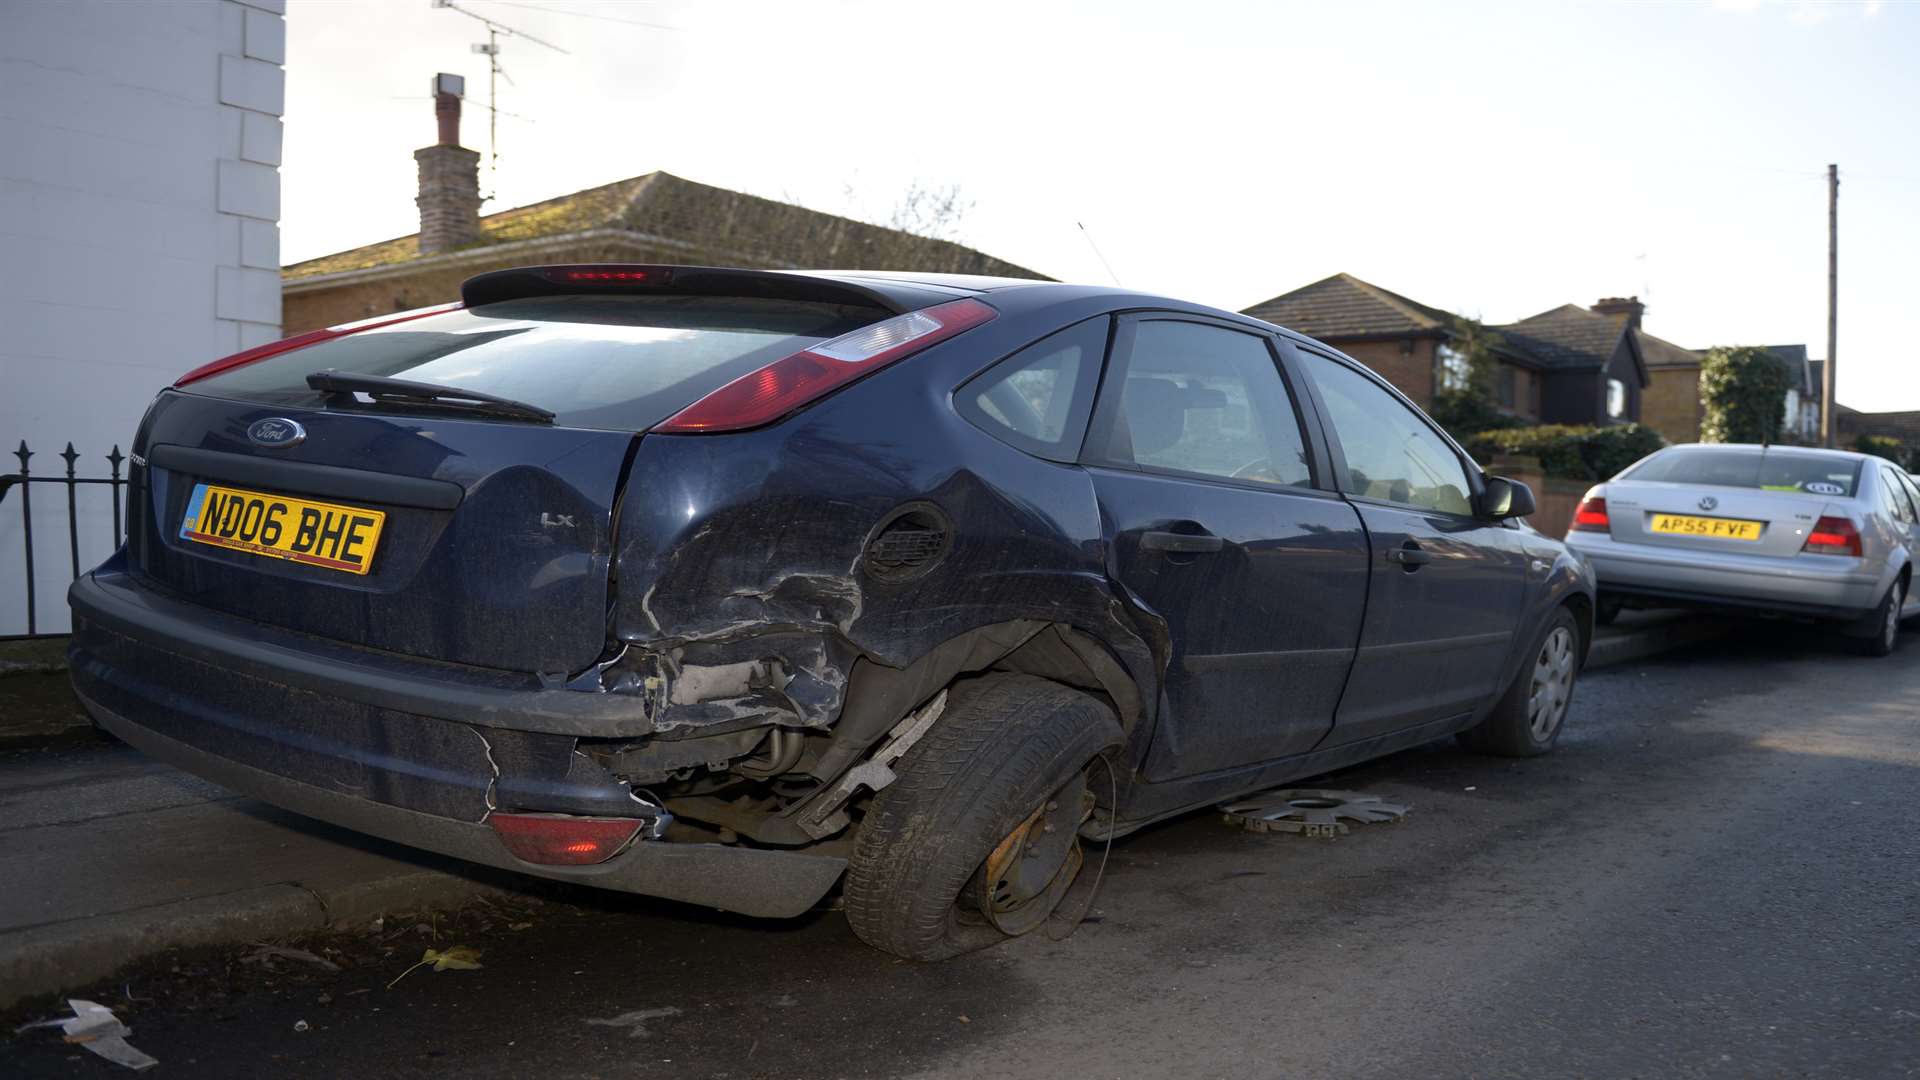 The runaway driver careered into a Ford Focus before smashing into a wall